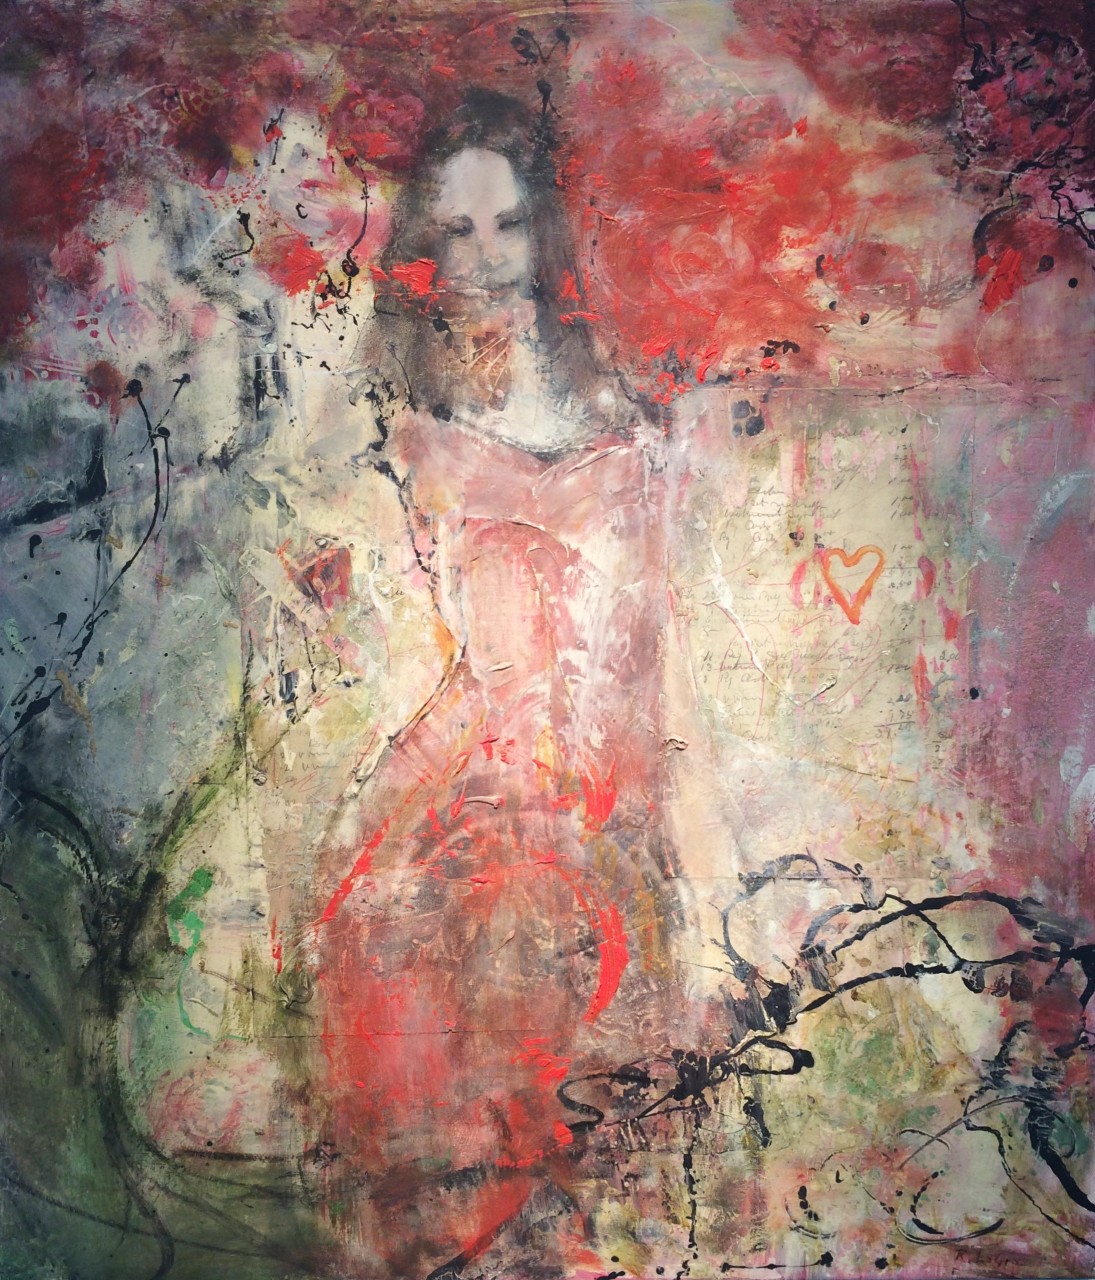 The Rose 32” x 28” oil, encaustic on panel